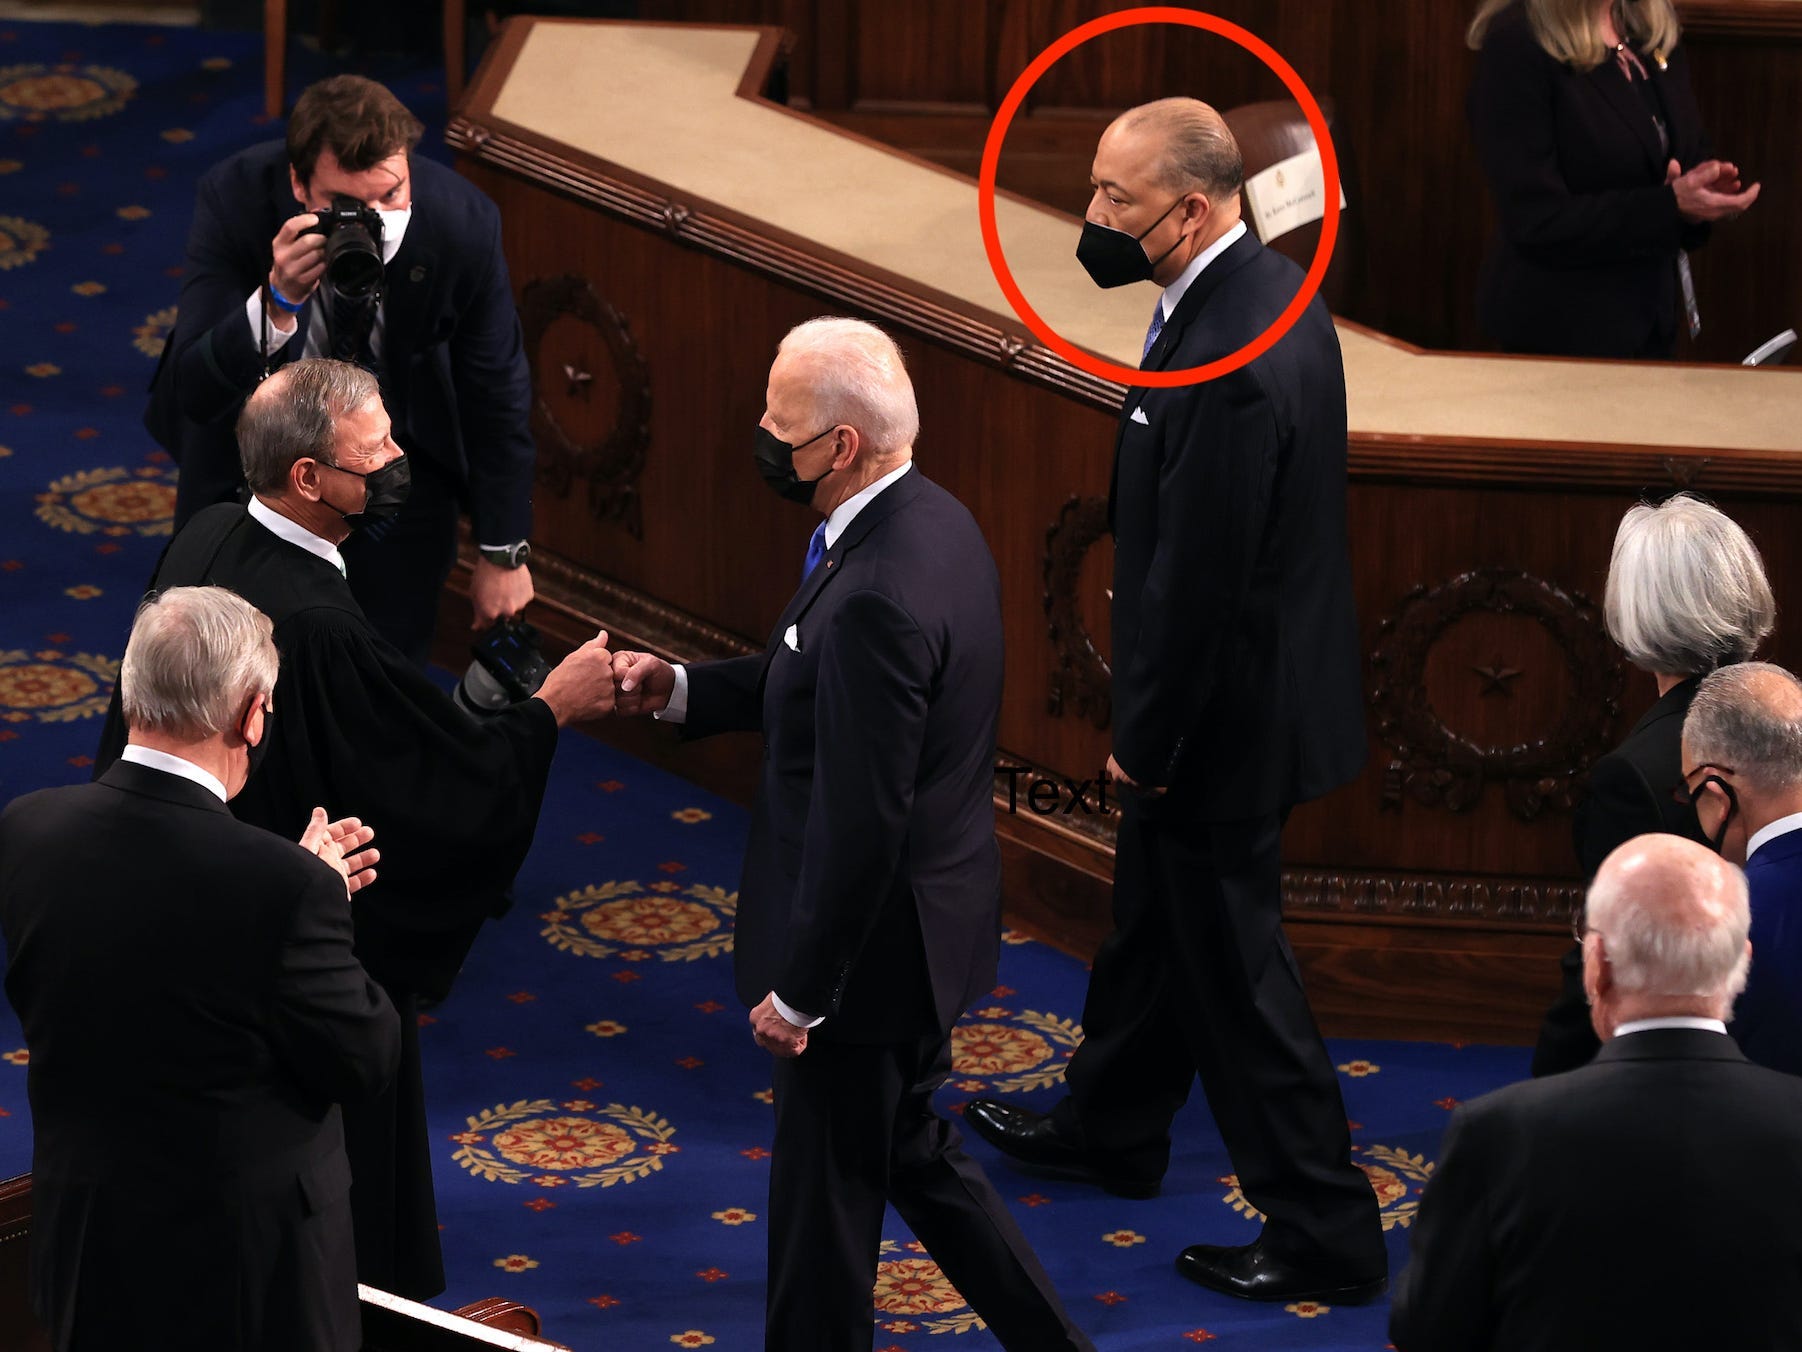 House Sergeant at Arms, General William Walker, escorts President Joe Biden in the chamber.